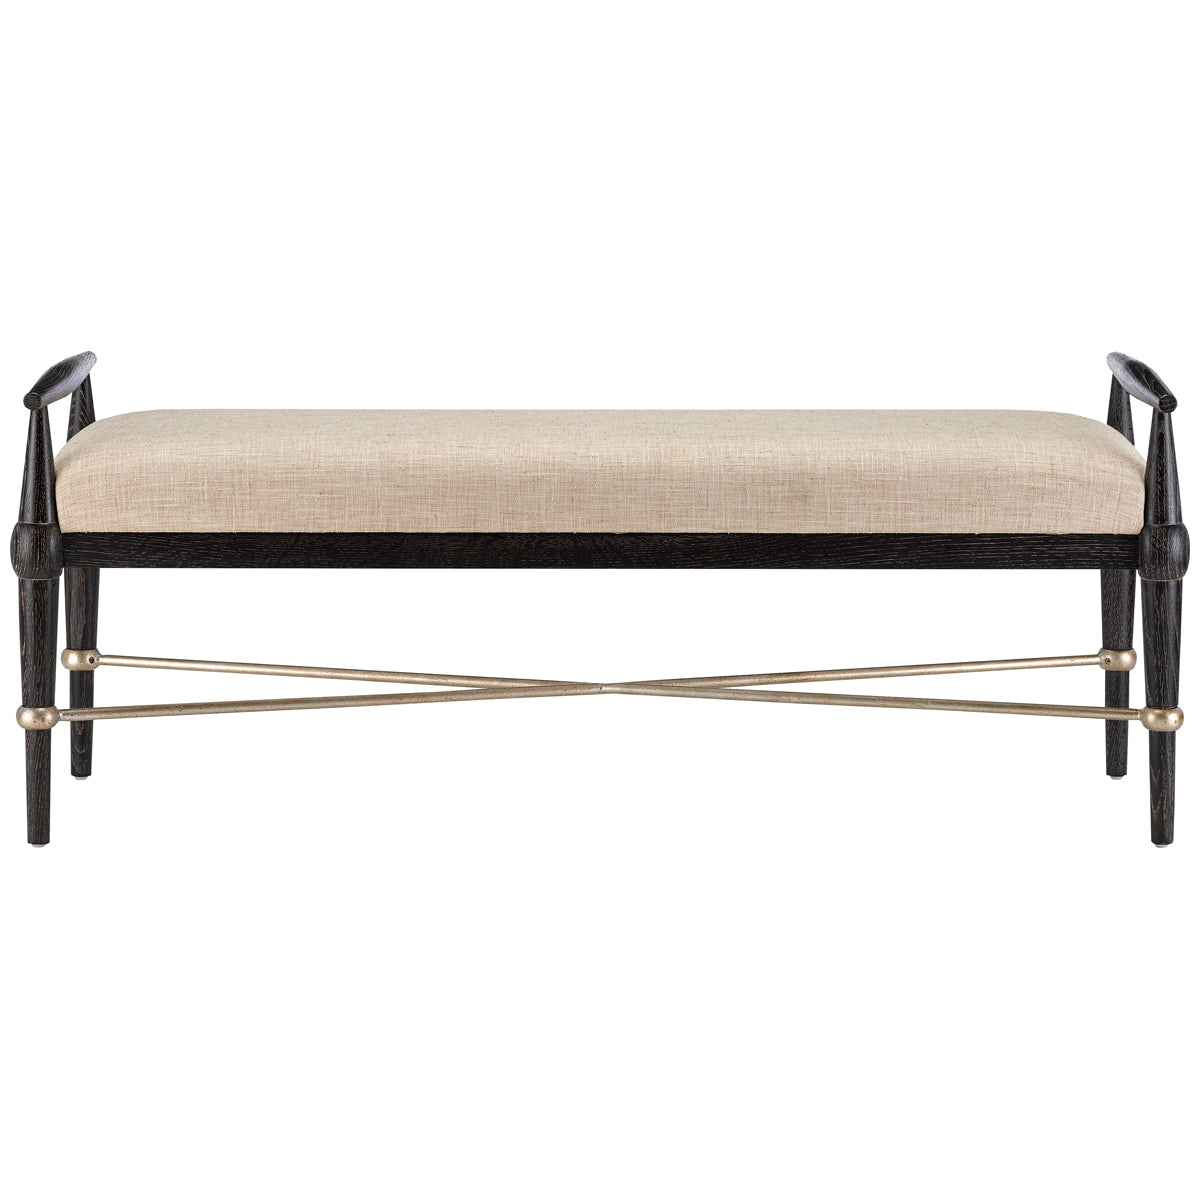 Currey and Company Perrin Bench